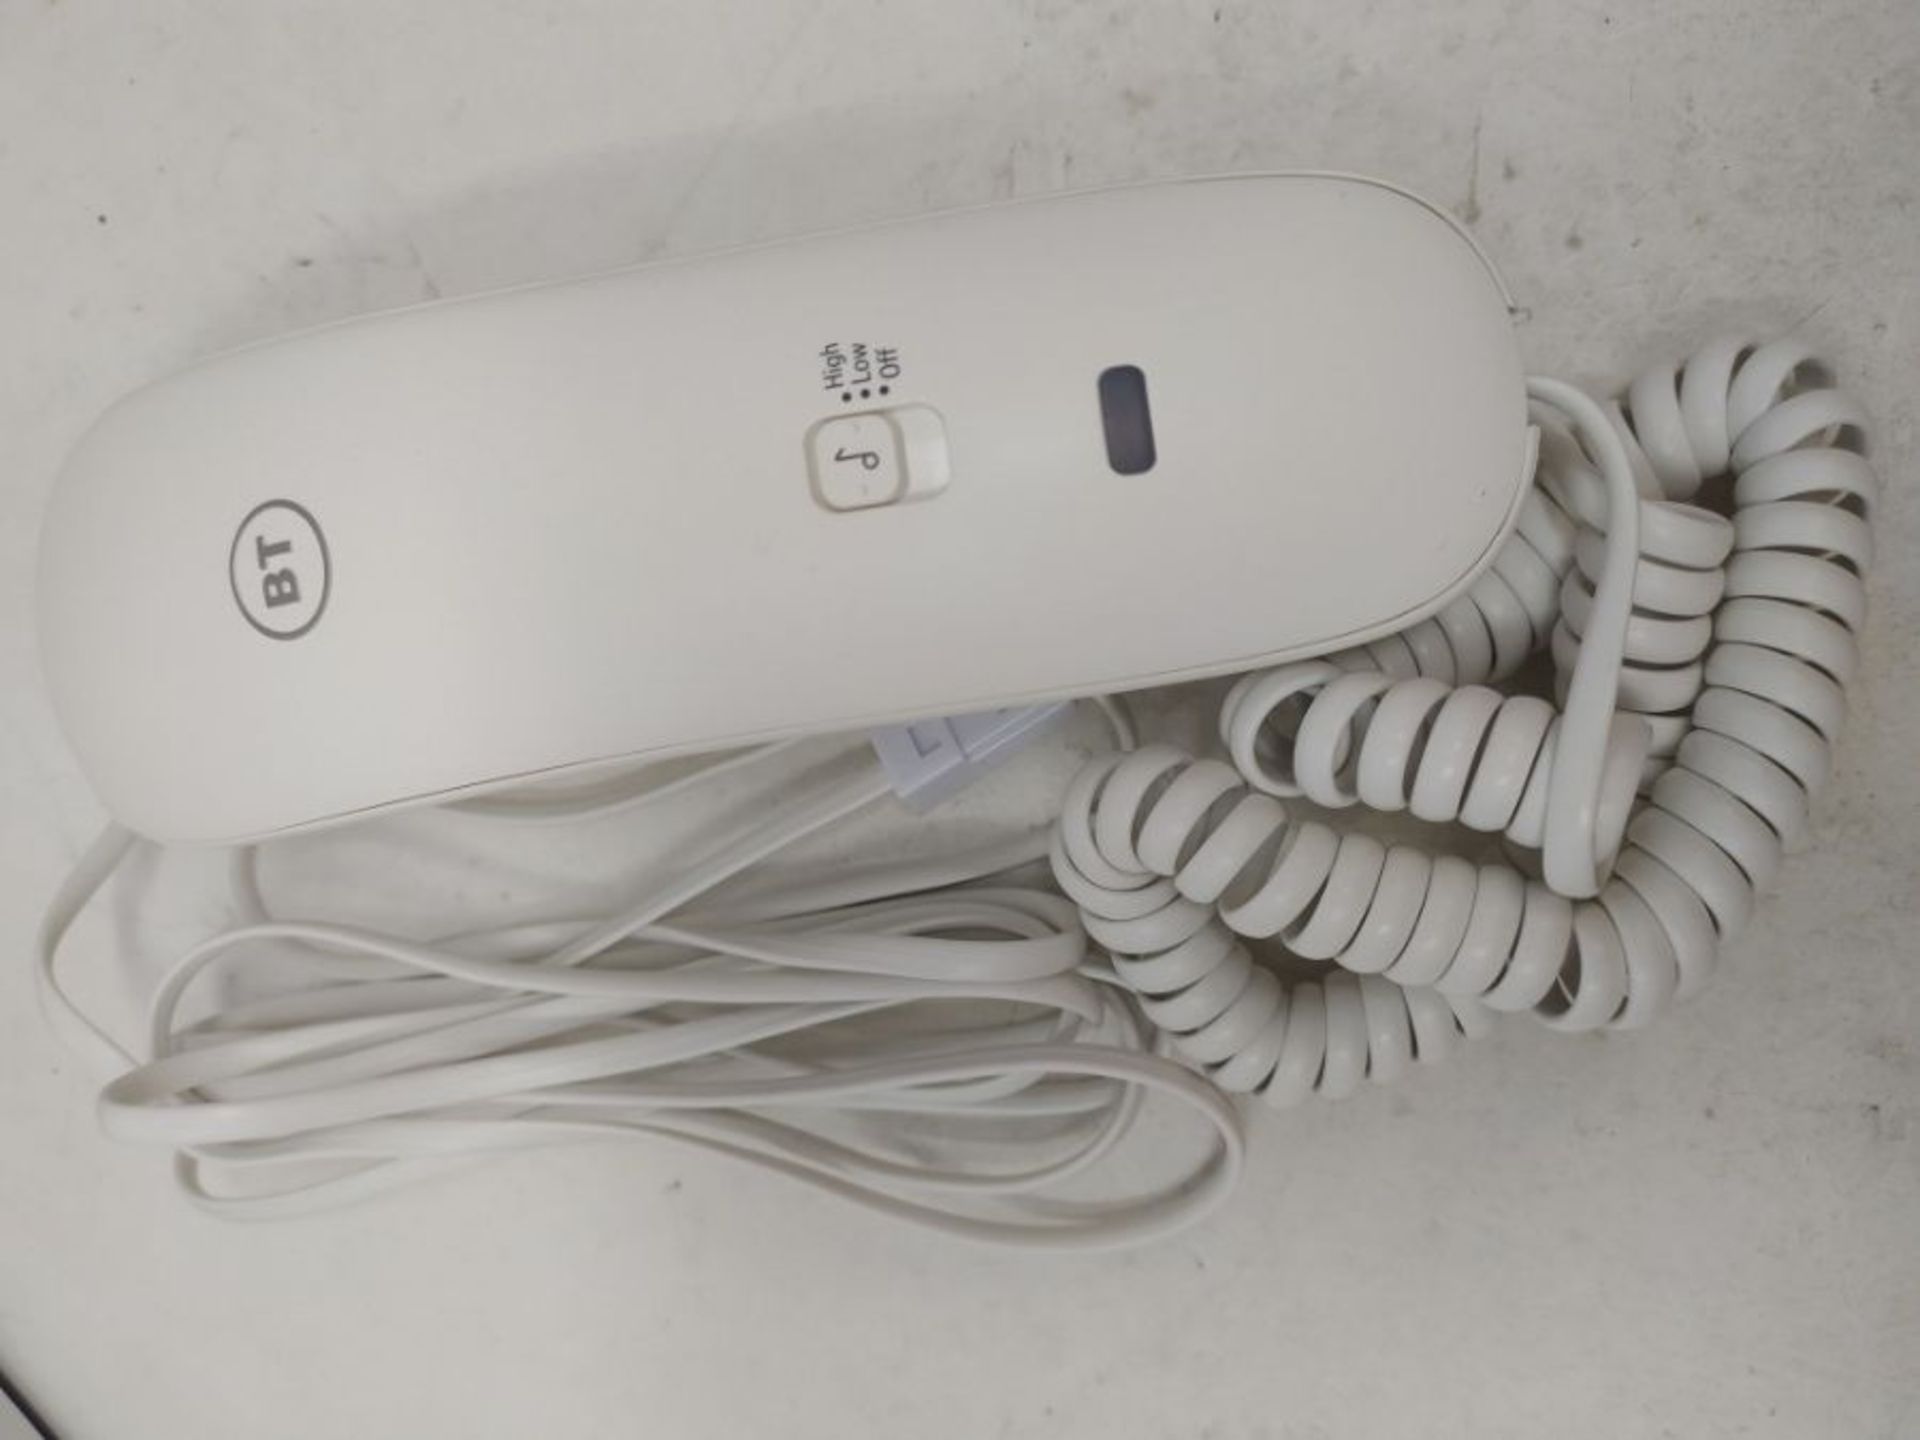 BT Duet 210 Corded Telephone, White - Image 2 of 2